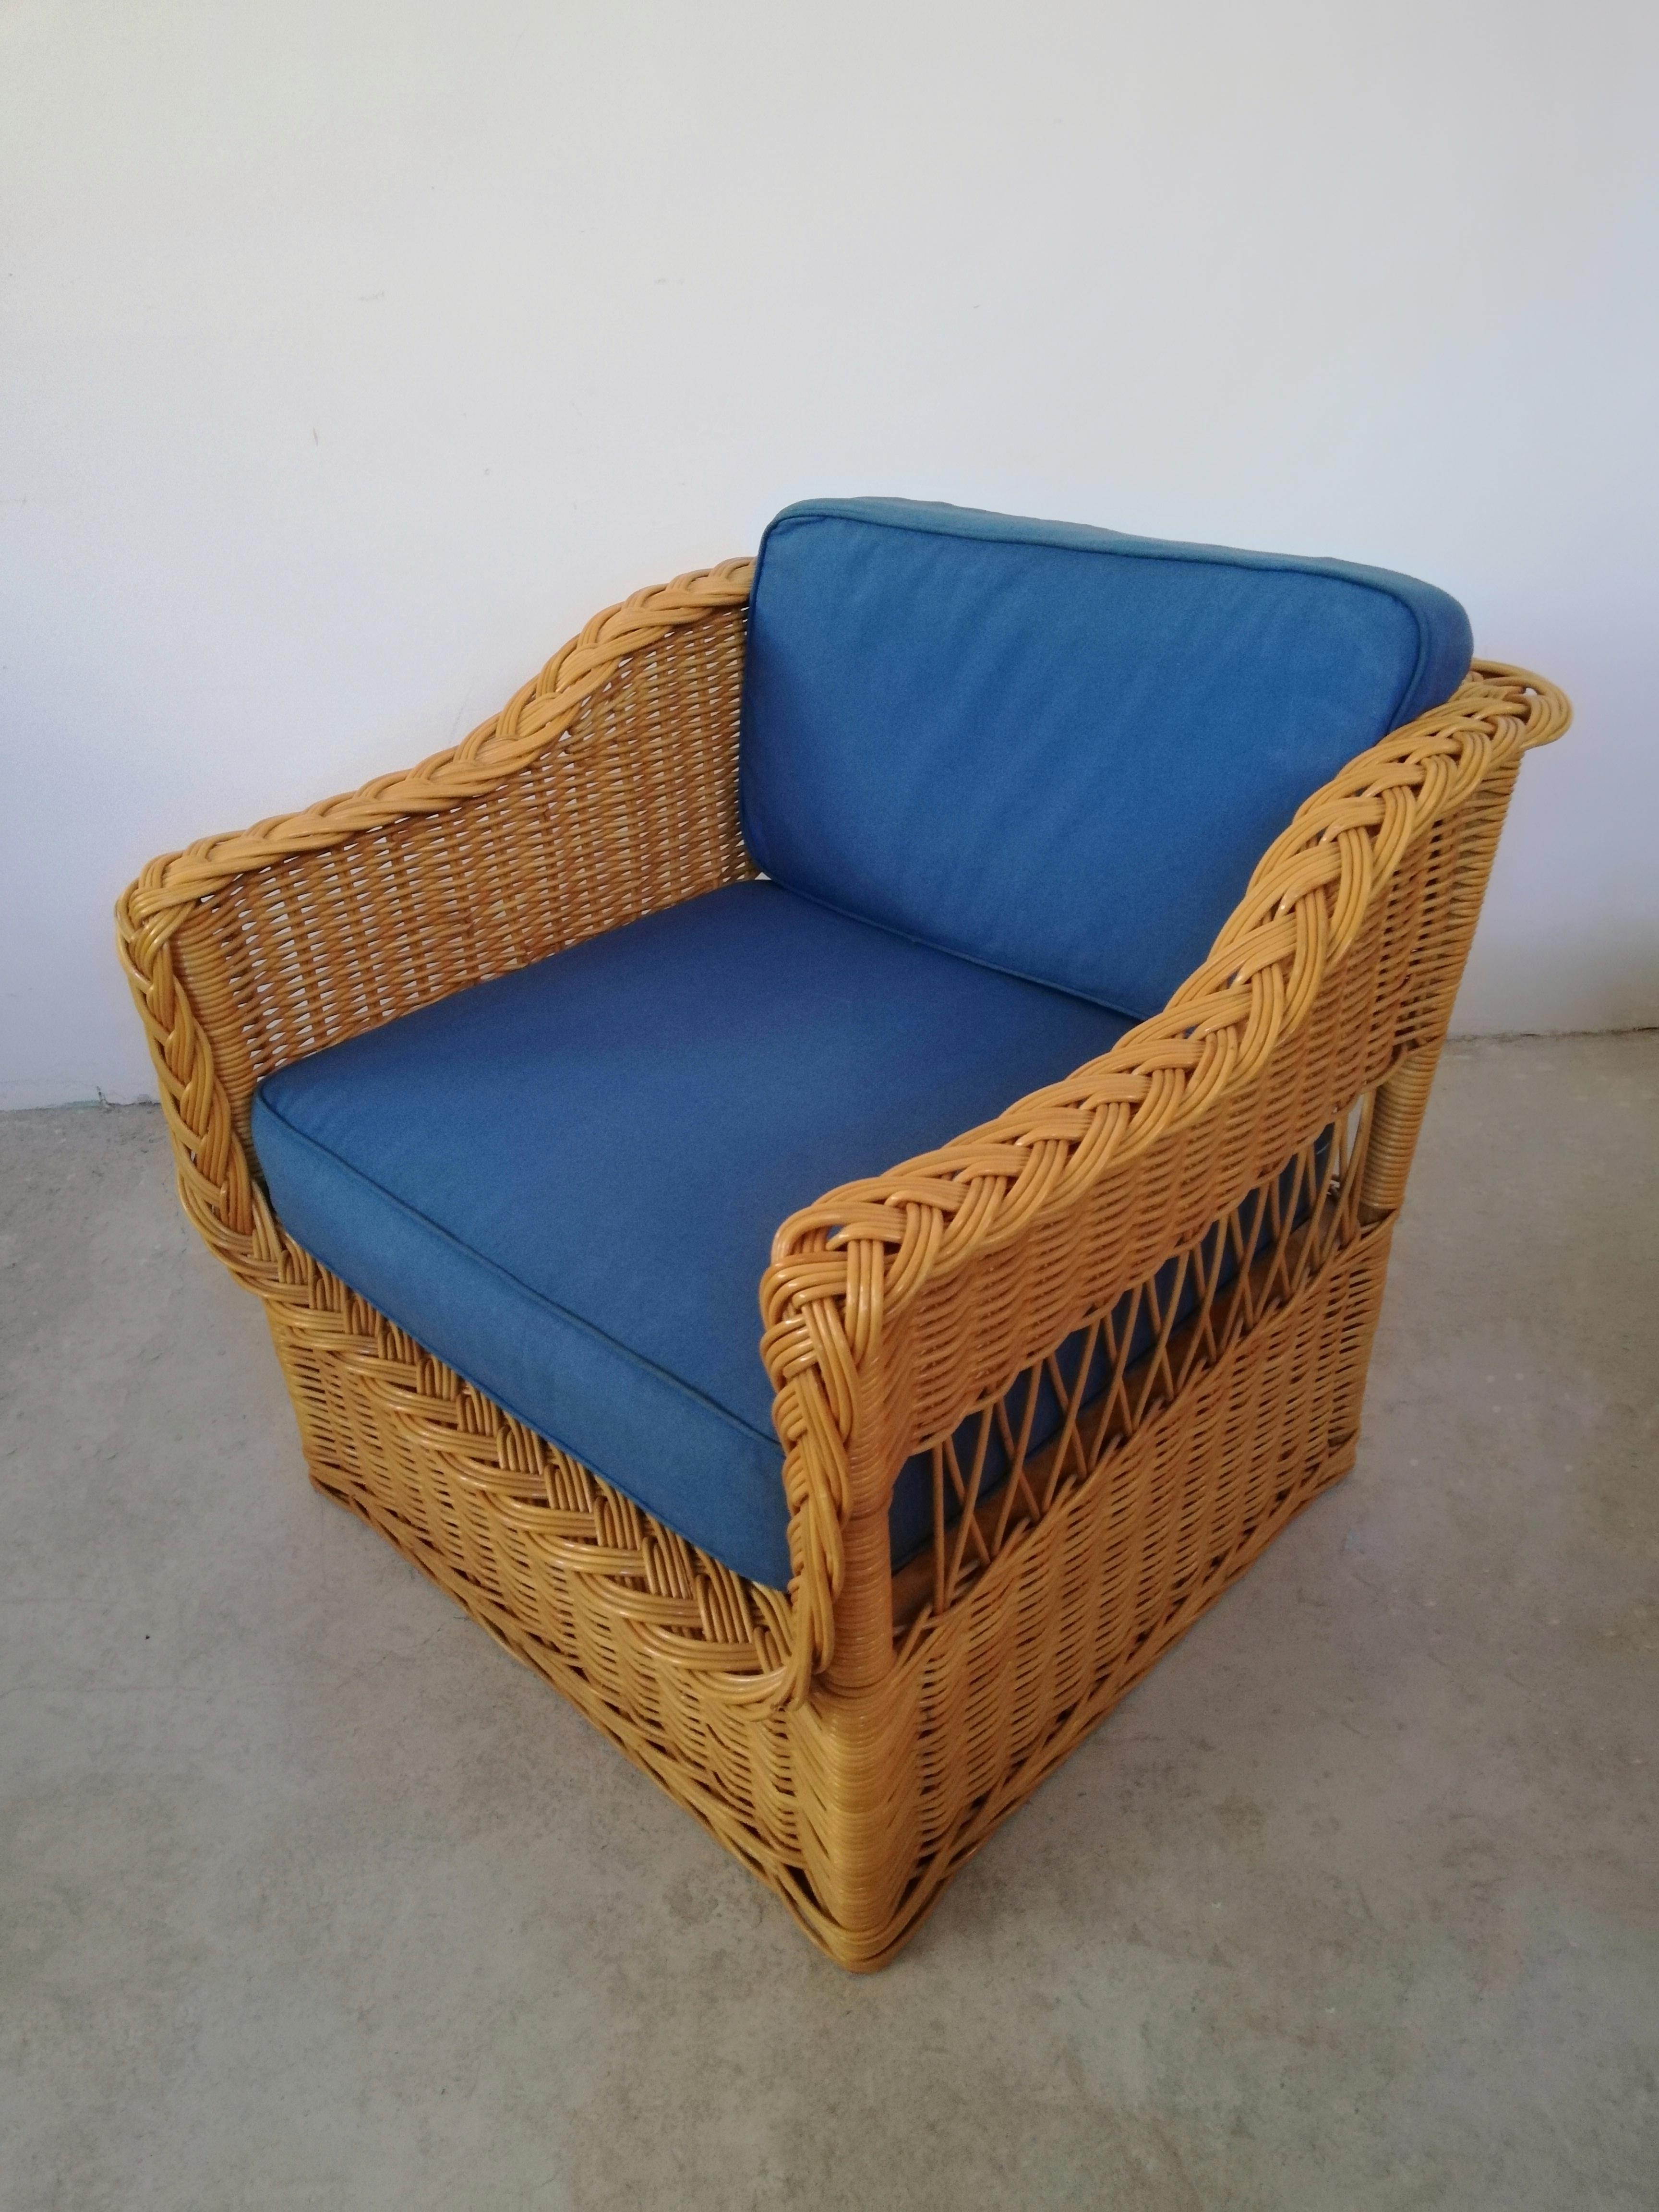 Pair of Wicker Armchairs in the Style of Rodi Serie by Vivai del Sud, 1970s For Sale 2